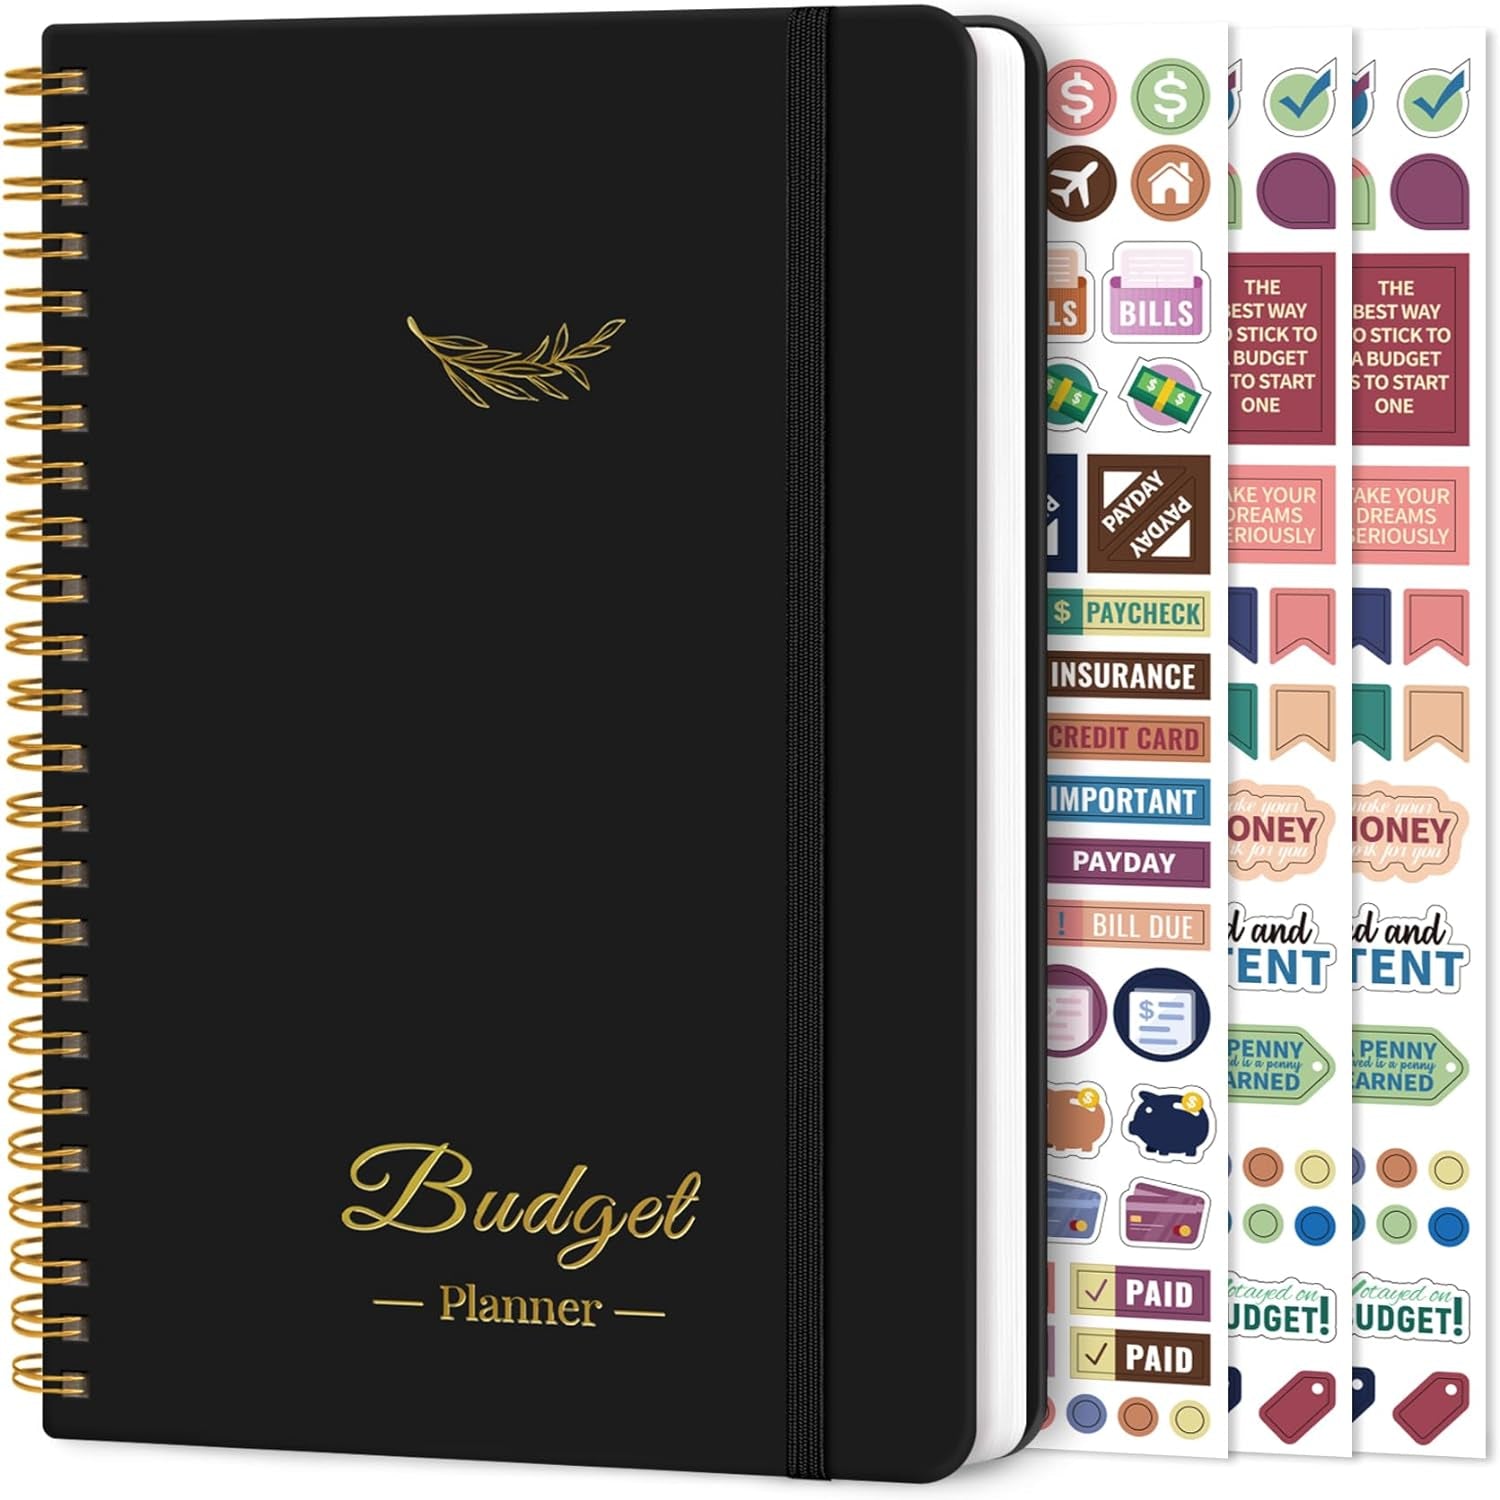 Budget Planner - Monthly Budget Book 2024 with Expense & Bill Tracker - Undated 12 Month Financial Planner/Account Book to Take Control of Your Money - Green